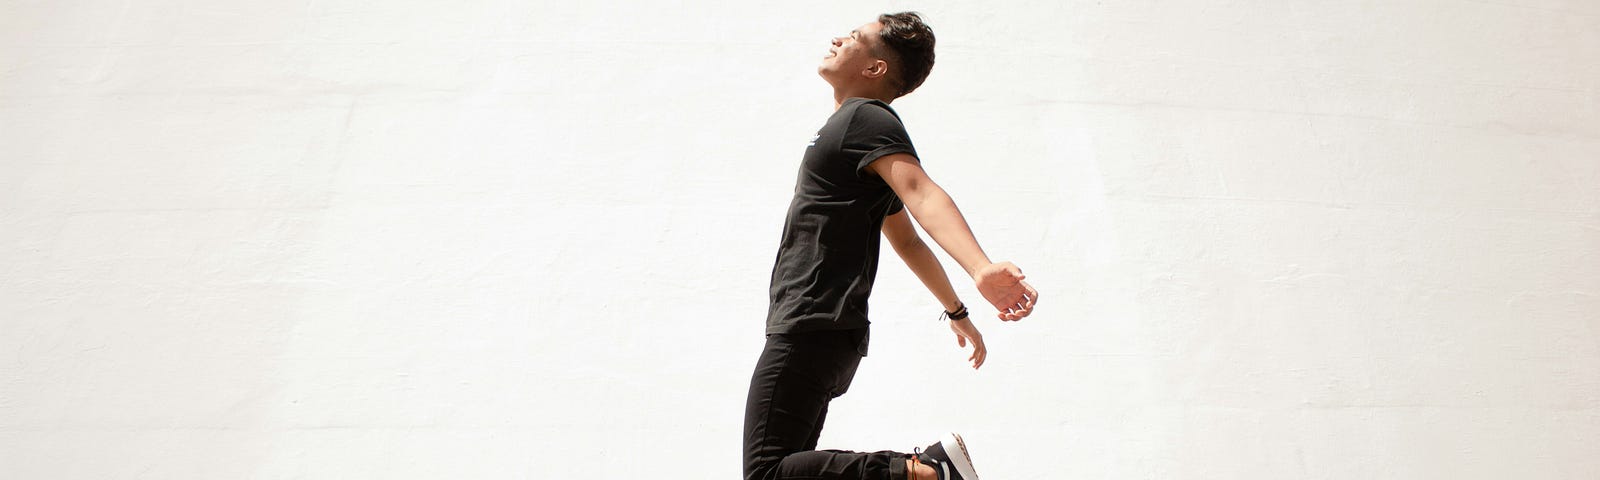 A man dressed in all black, jacket and pants, leaps against a stark white concrete wall in the bright light of day